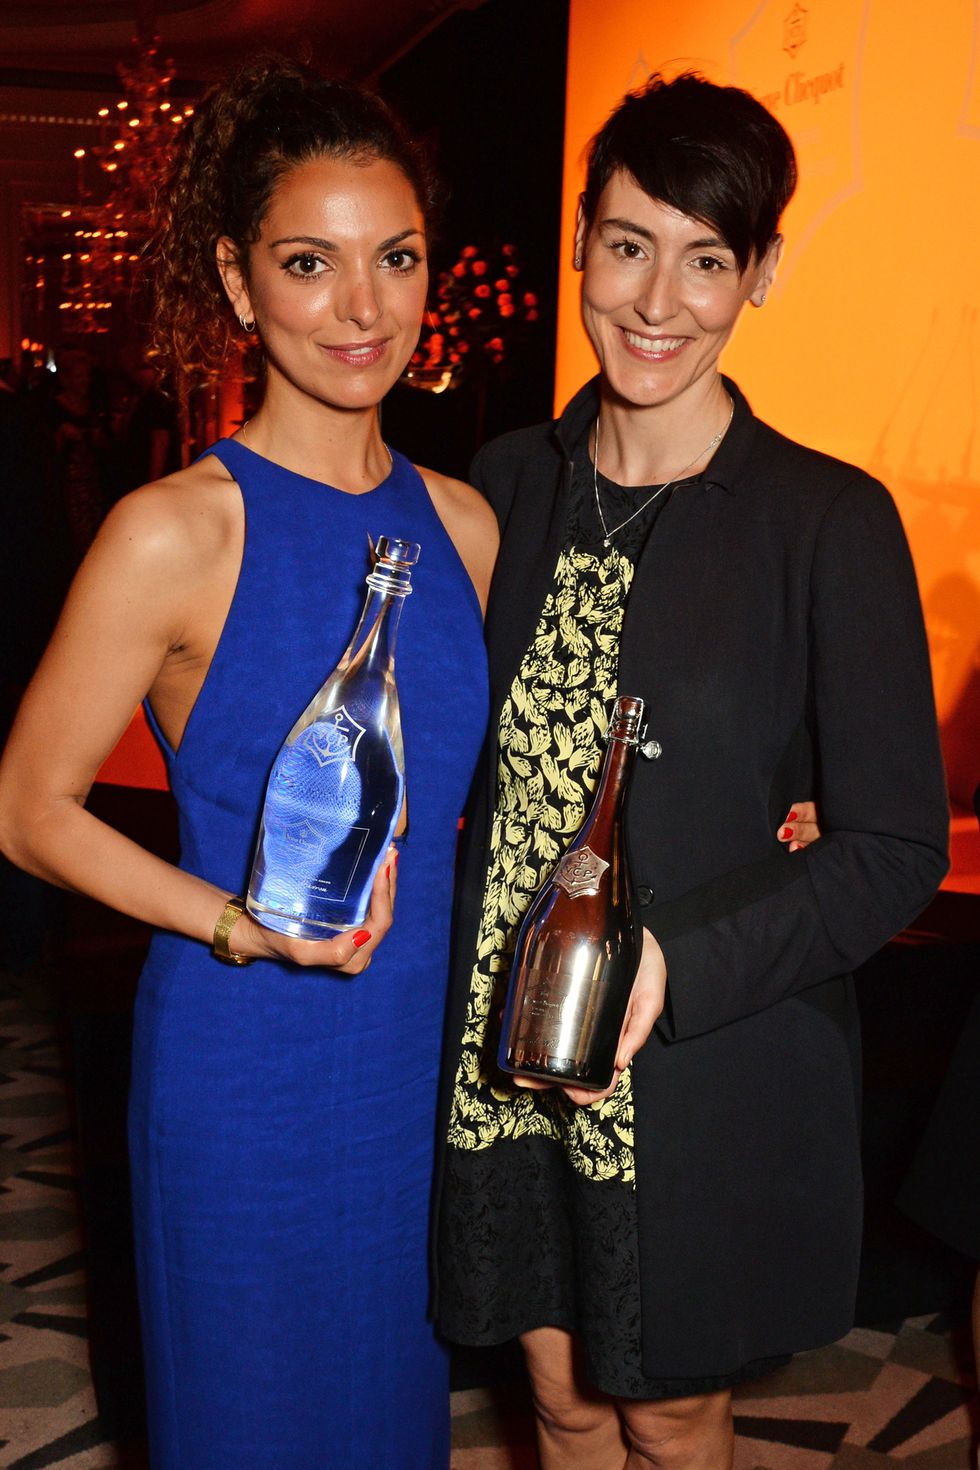 Veuve Cliquot Business Woman of the Year Awards 2016 winners